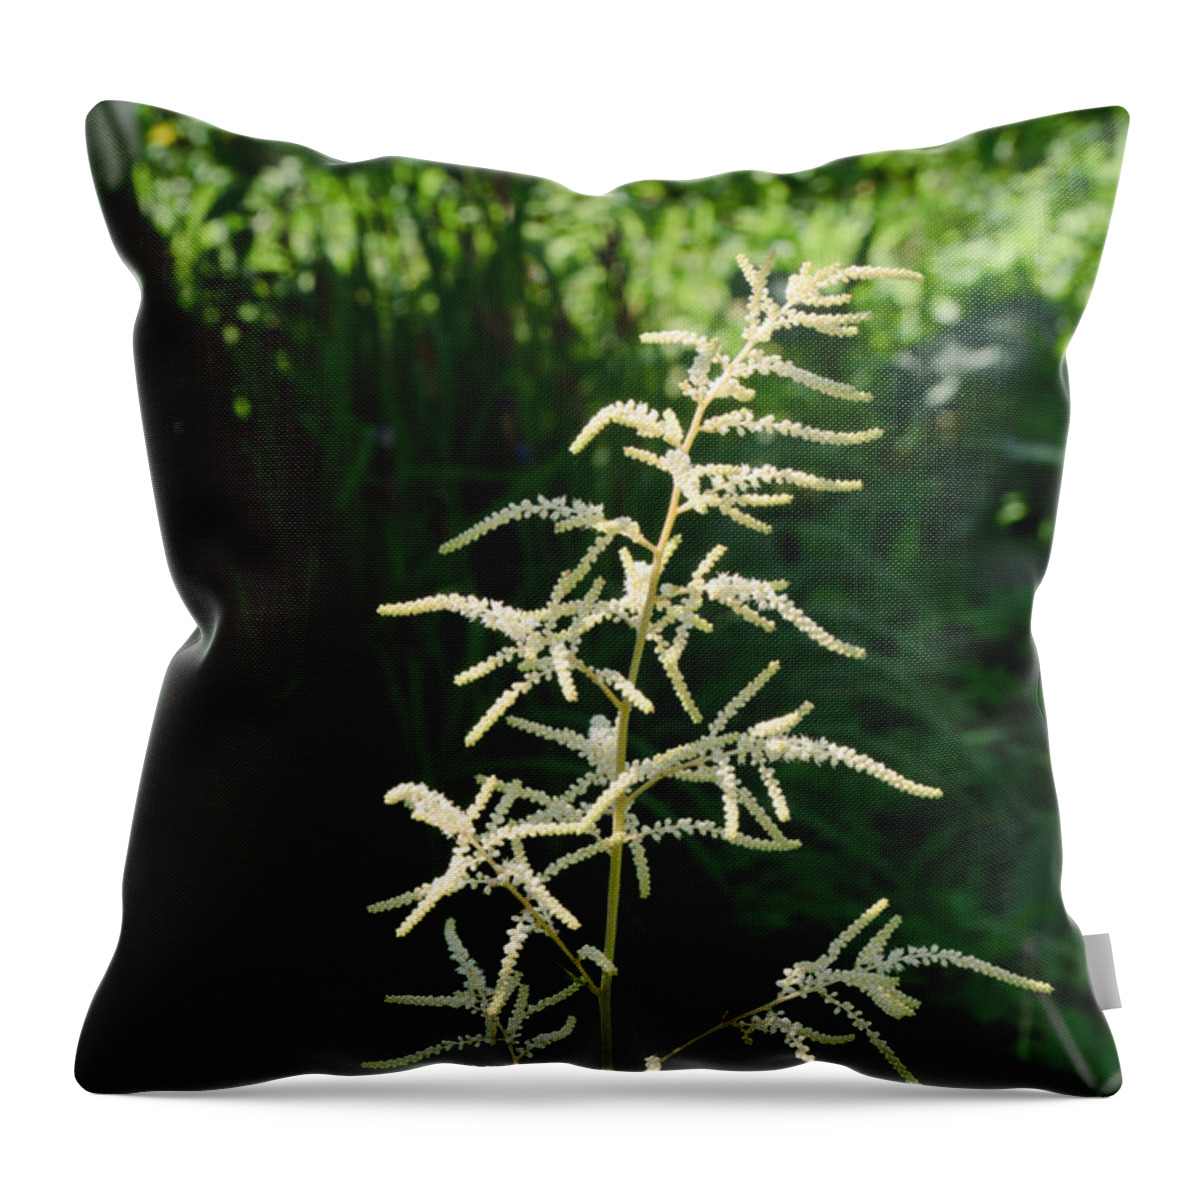 Close-up Throw Pillow featuring the photograph Aruncus by Michael Goyberg